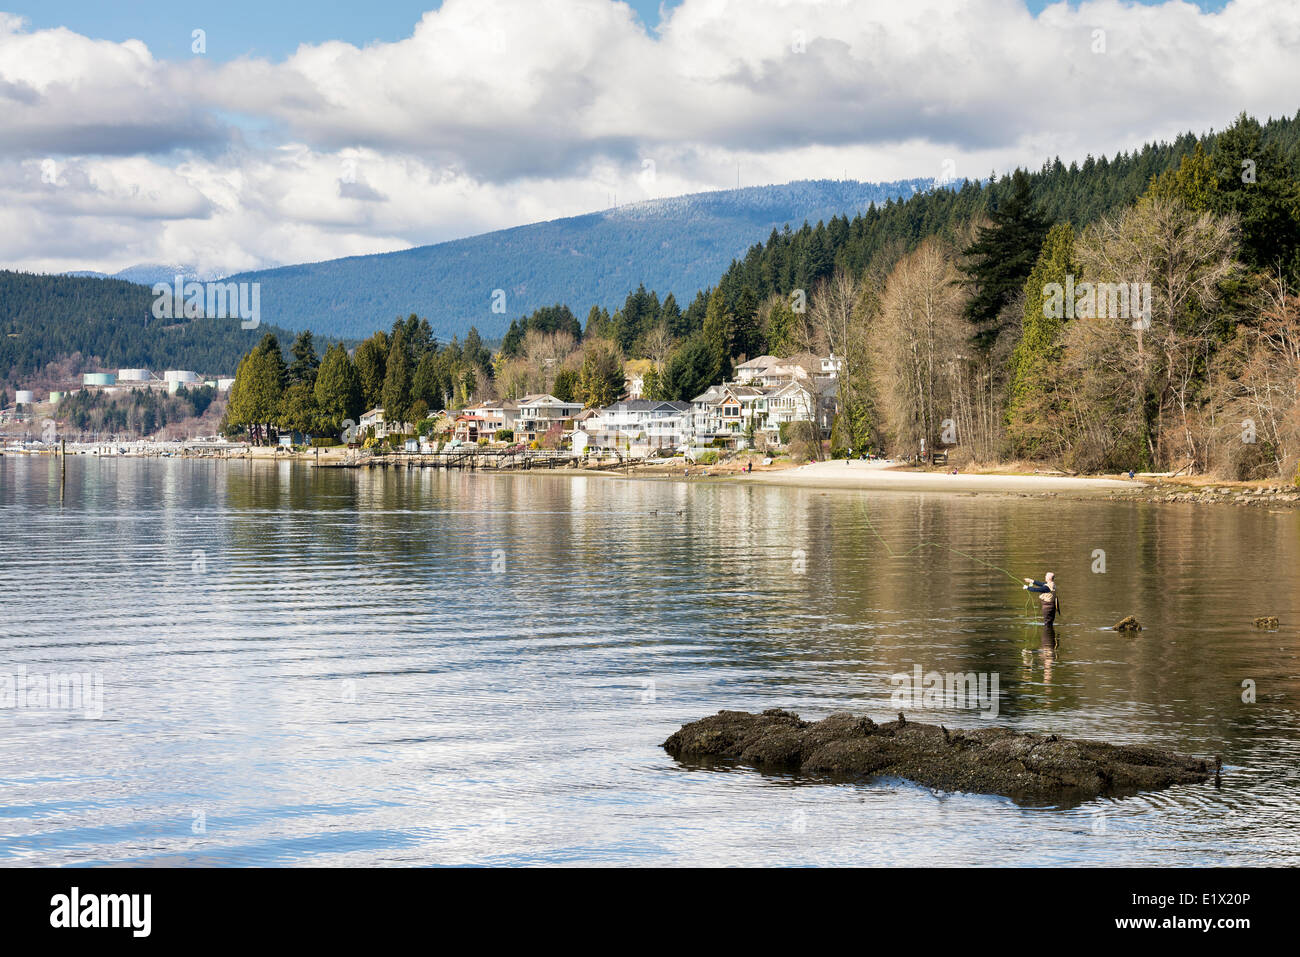 Fisherman fishing in the Burrard Inlet at Rocky Point Park in Port Moody, British Columbia, Canada Stock Photo